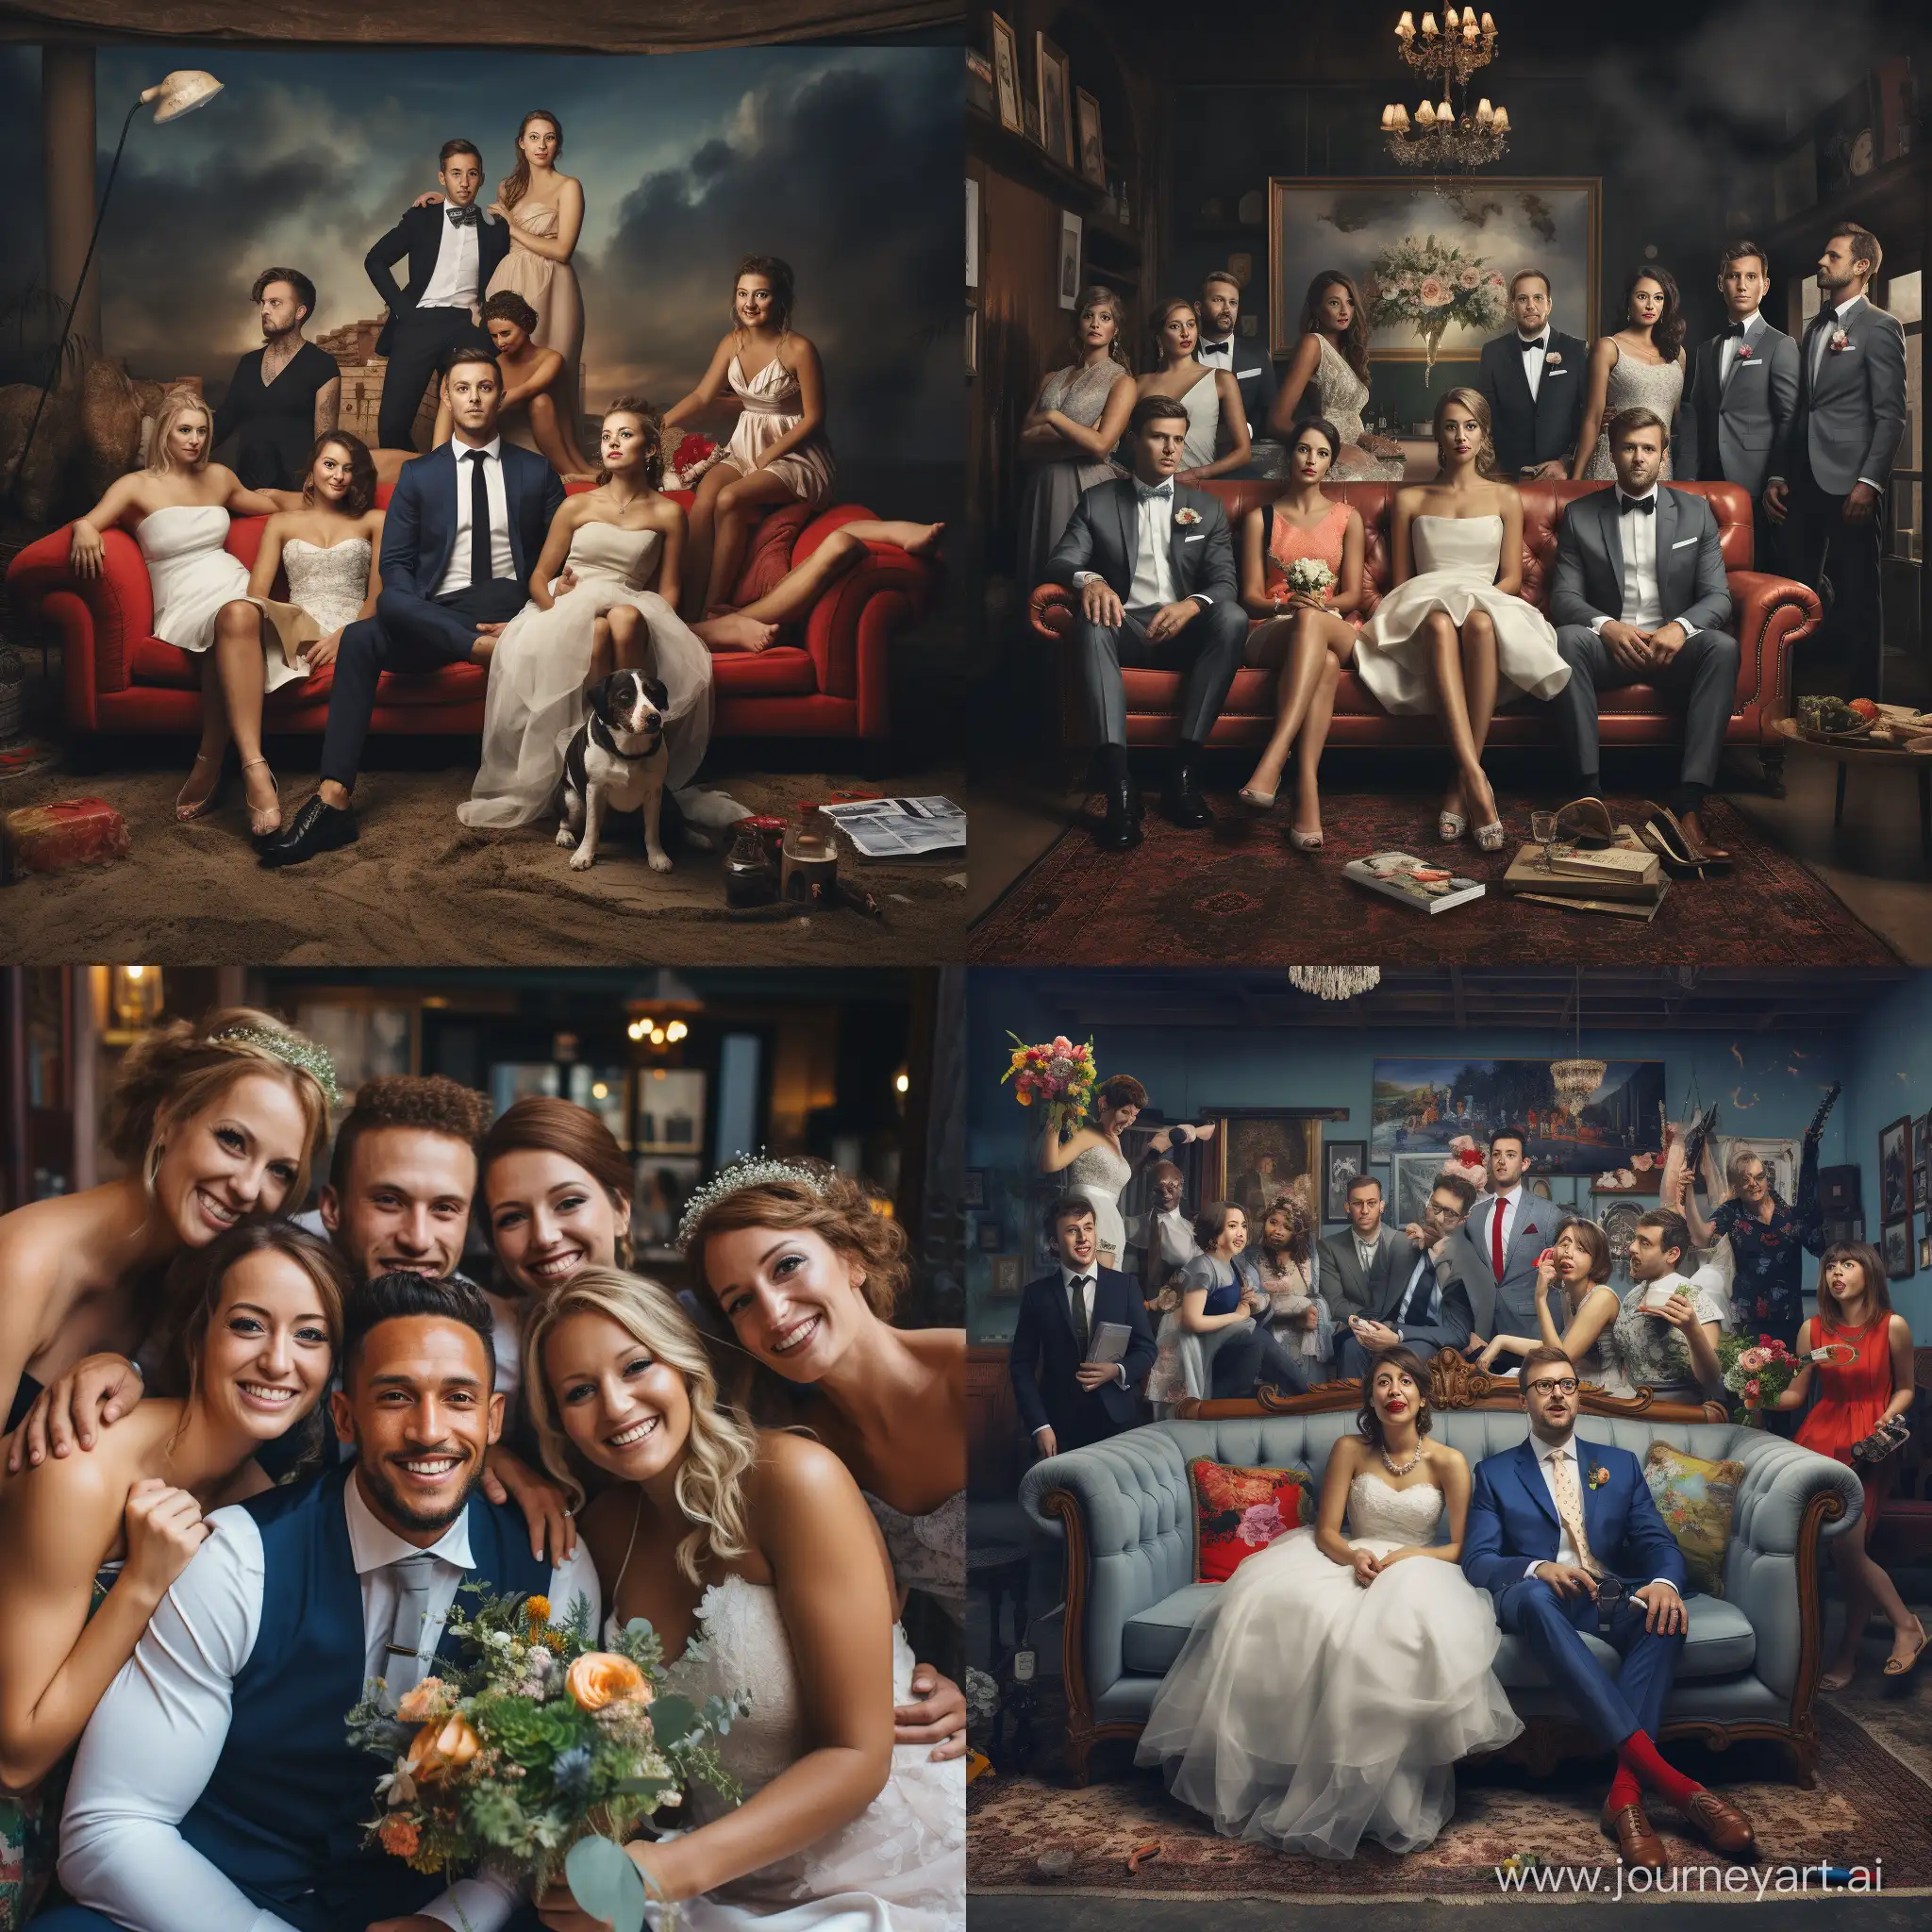 Newlyweds-Celebrating-Love-with-Friends-in-Candid-Photograph